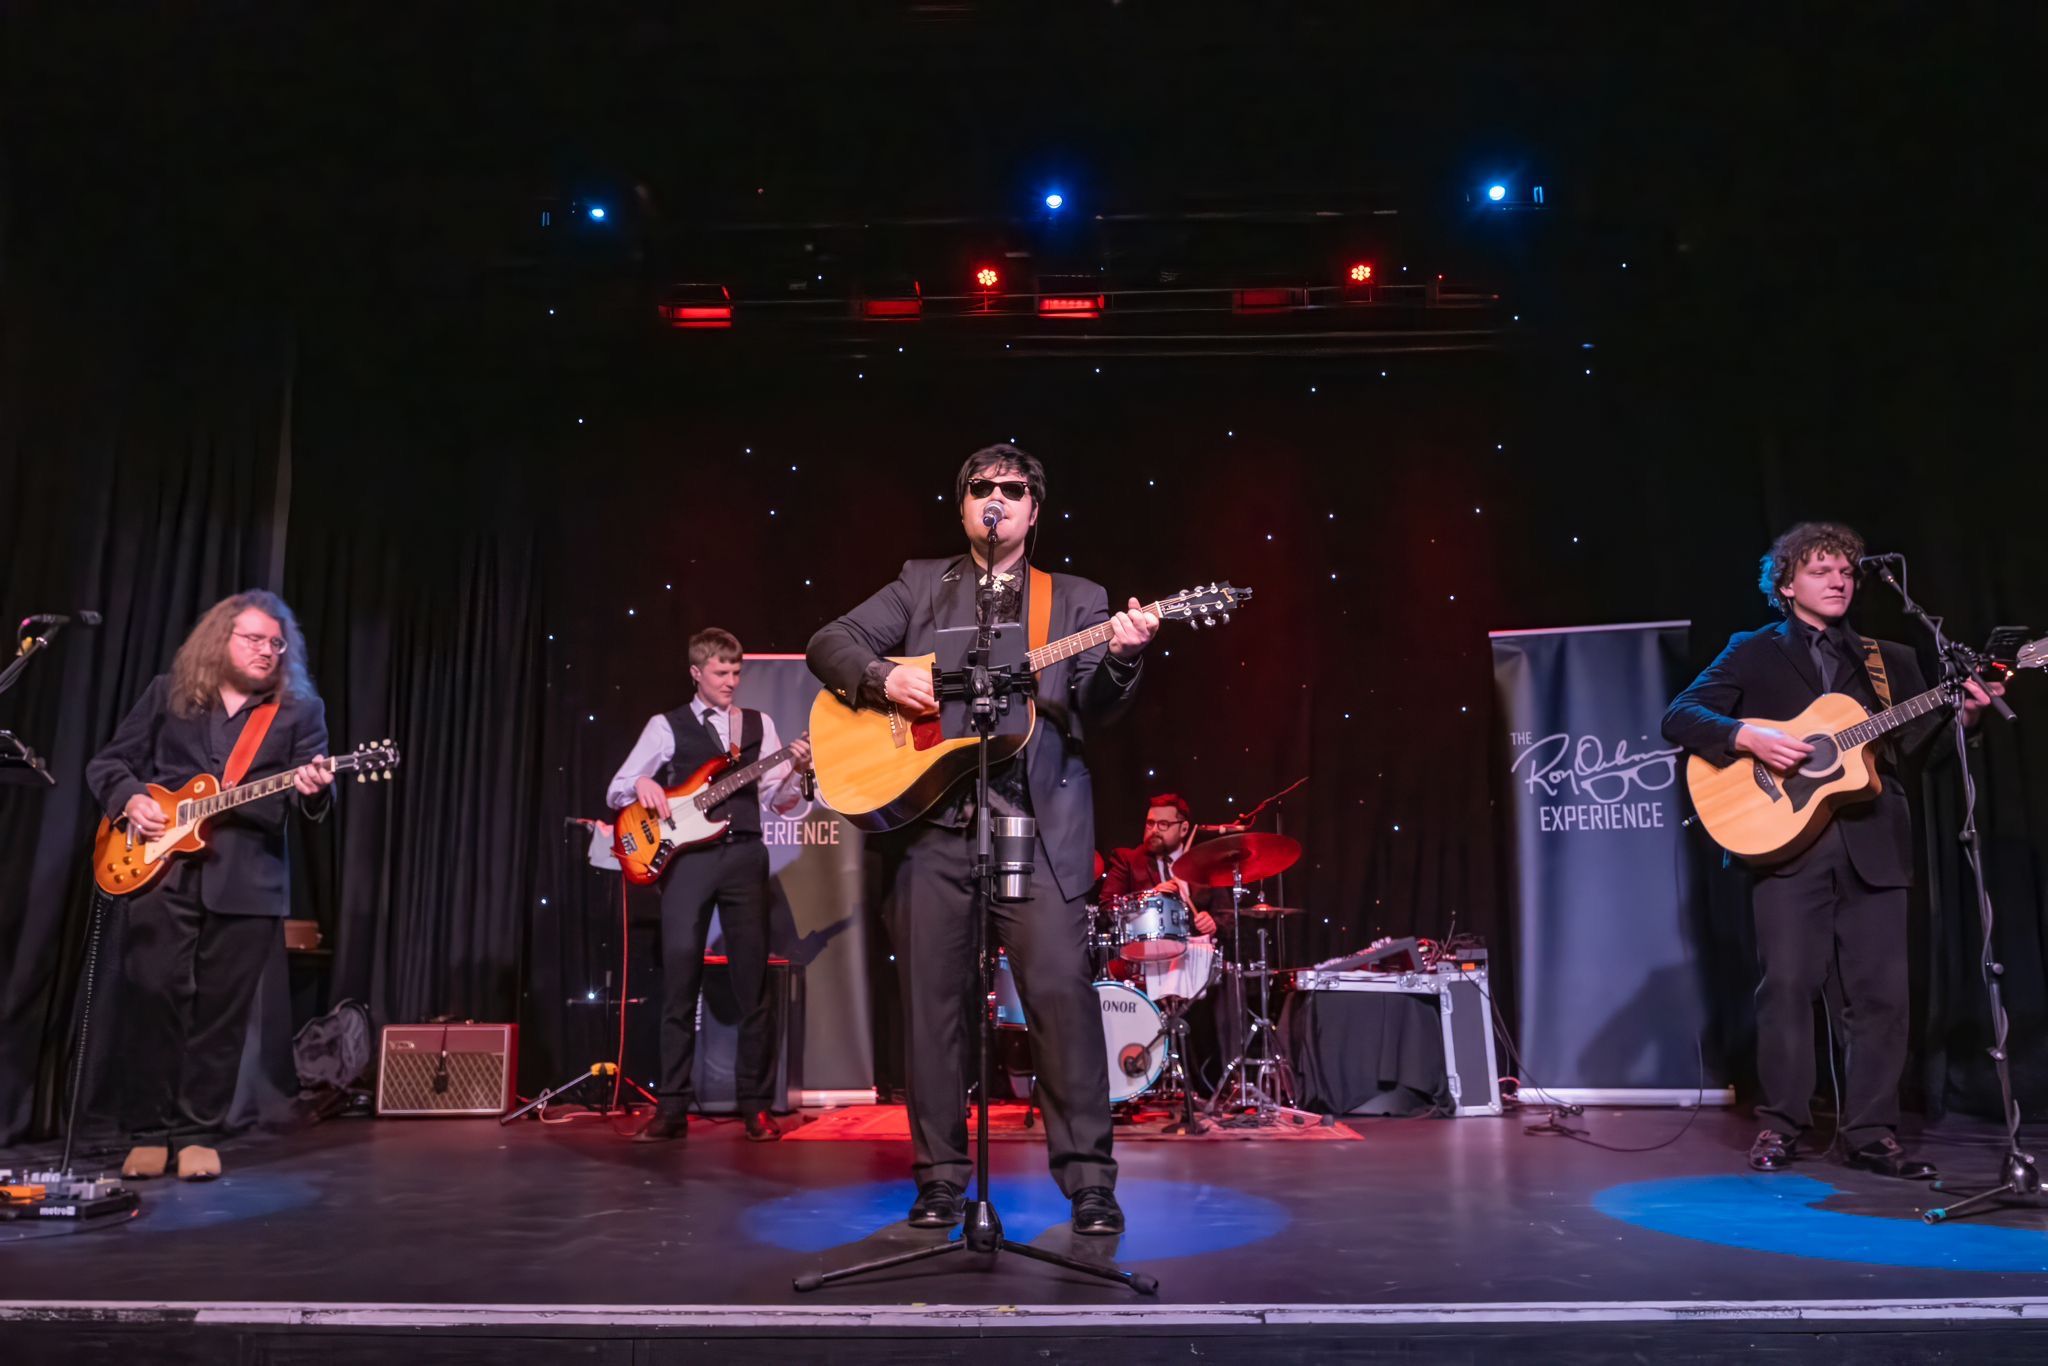 The Roy Orbison Experience - An evening of iconic music